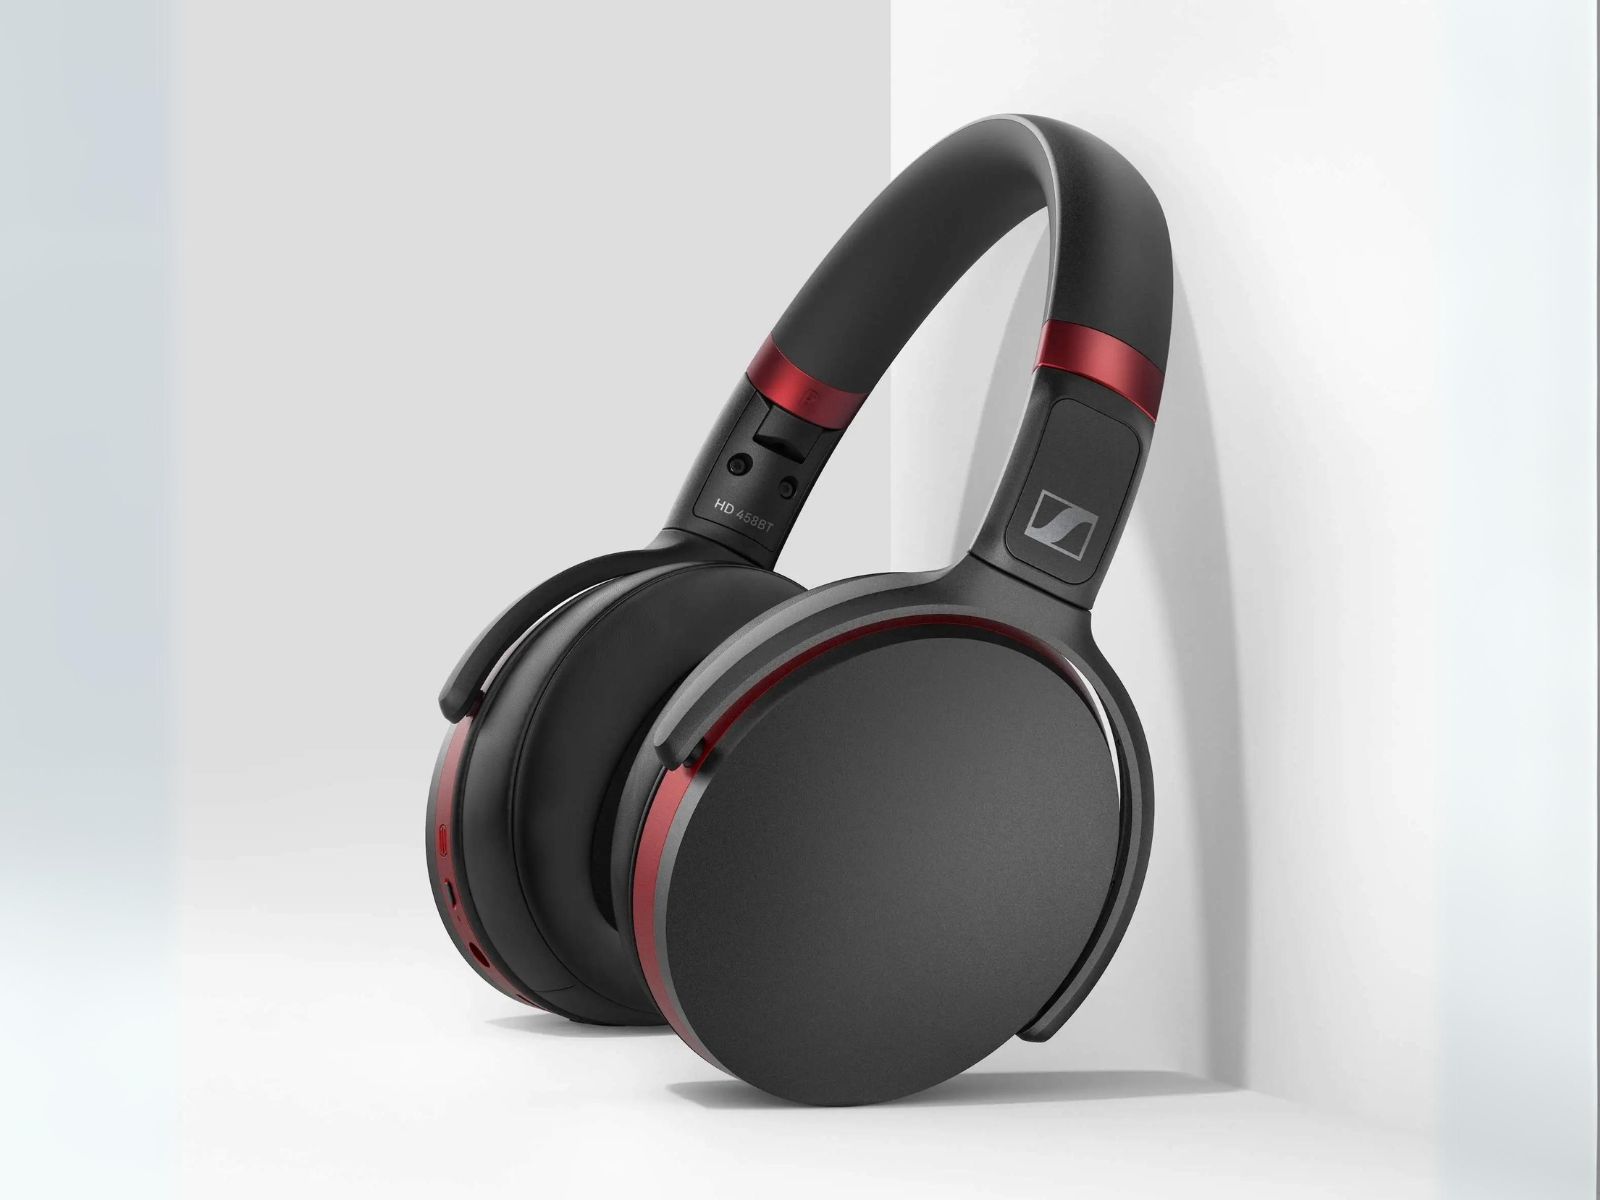 QCY Unveils the H3 Wireless Noise-Canceling Headphones for $40